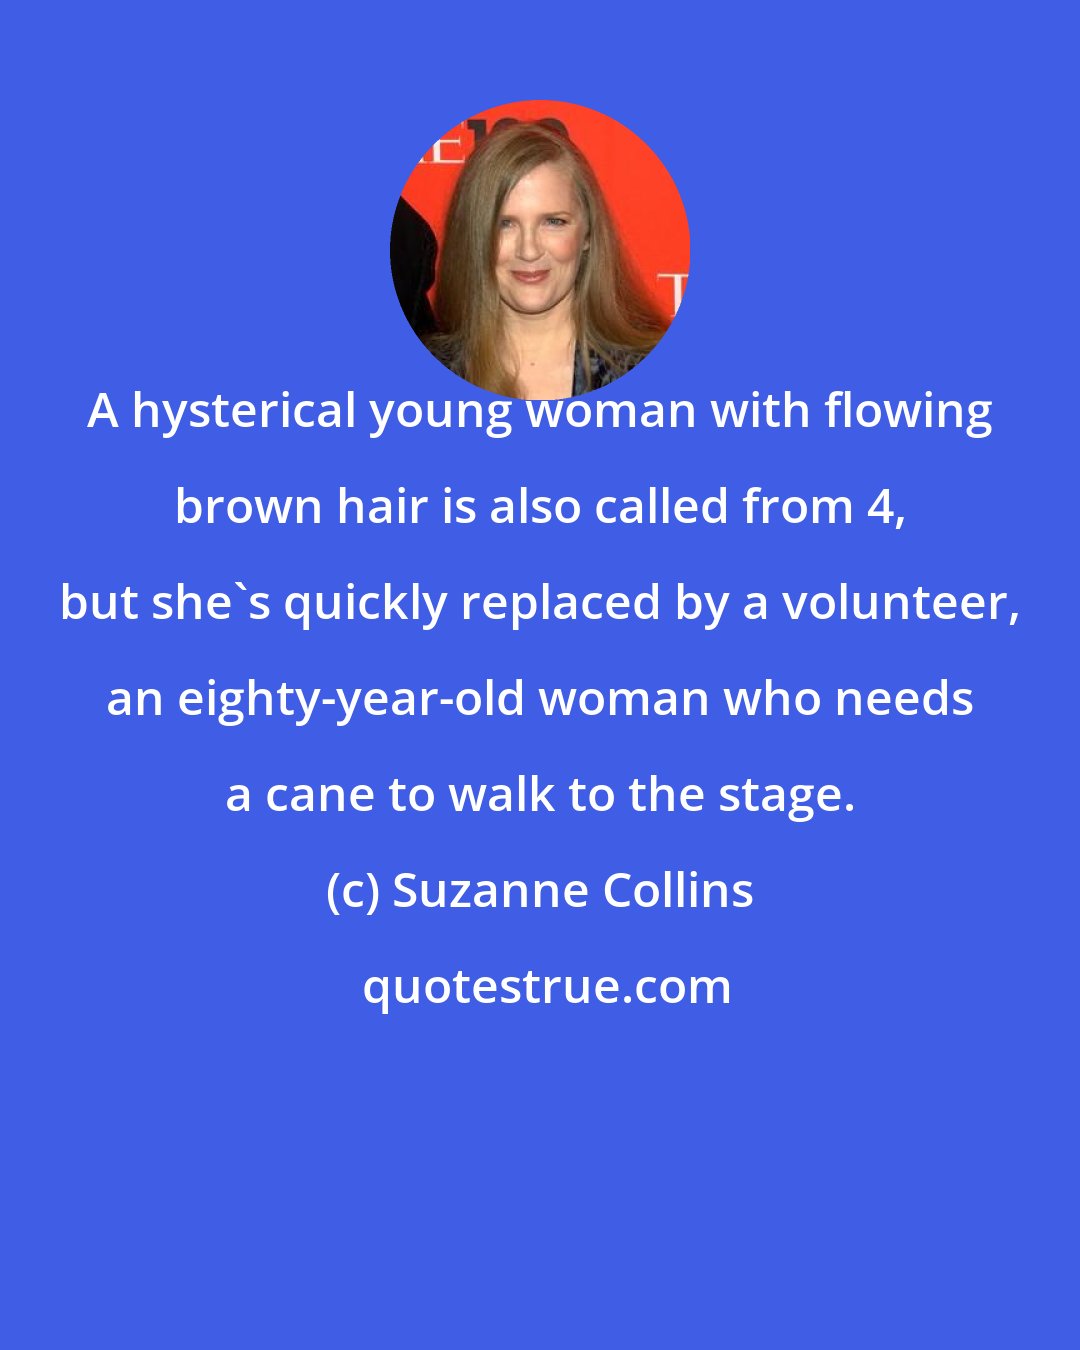 Suzanne Collins: A hysterical young woman with flowing brown hair is also called from 4, but she's quickly replaced by a volunteer, an eighty-year-old woman who needs a cane to walk to the stage.